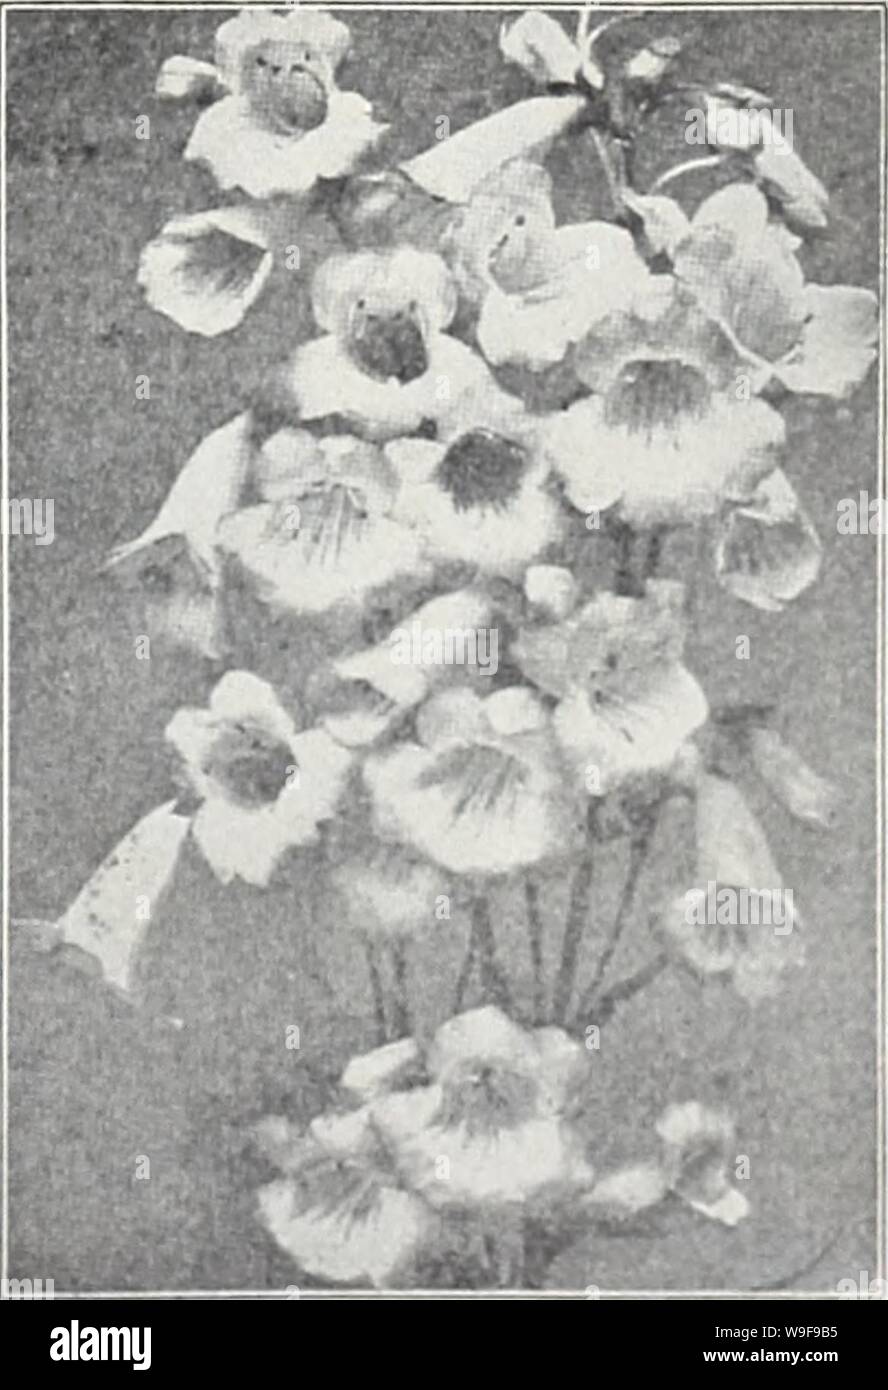 Archive image from page 24 of Currie's 65th year garden annual. Currie's 65th year garden annual  curries65thyearg19curr Year: 1940 ( Lilies GROW YOUR OWN LILIES FROM SEED AURATUM PLATYPHYLLUM (Gold Bonded Lily ot Japan) — Ivory white, spotted with crim- son. Pkt., 20c. HENRYI (Yellow Show Lily) — Rich apricot yellow blooms with a few brown spots. 5 to 6 feet high. Pkt., 25c. FORMOSANUM (Dream Lily) — Long white, trumpet-shaped flowers, slightly marked reddish brown. Pkt., 20c. SPECIOSUM MAGNIFICUM (Show Lily)—Ivory-white, heav- ily suffused with rosy crimson. 3-4 feet. Pkt., 25c. TENNUIFOLIUM Stock Photo